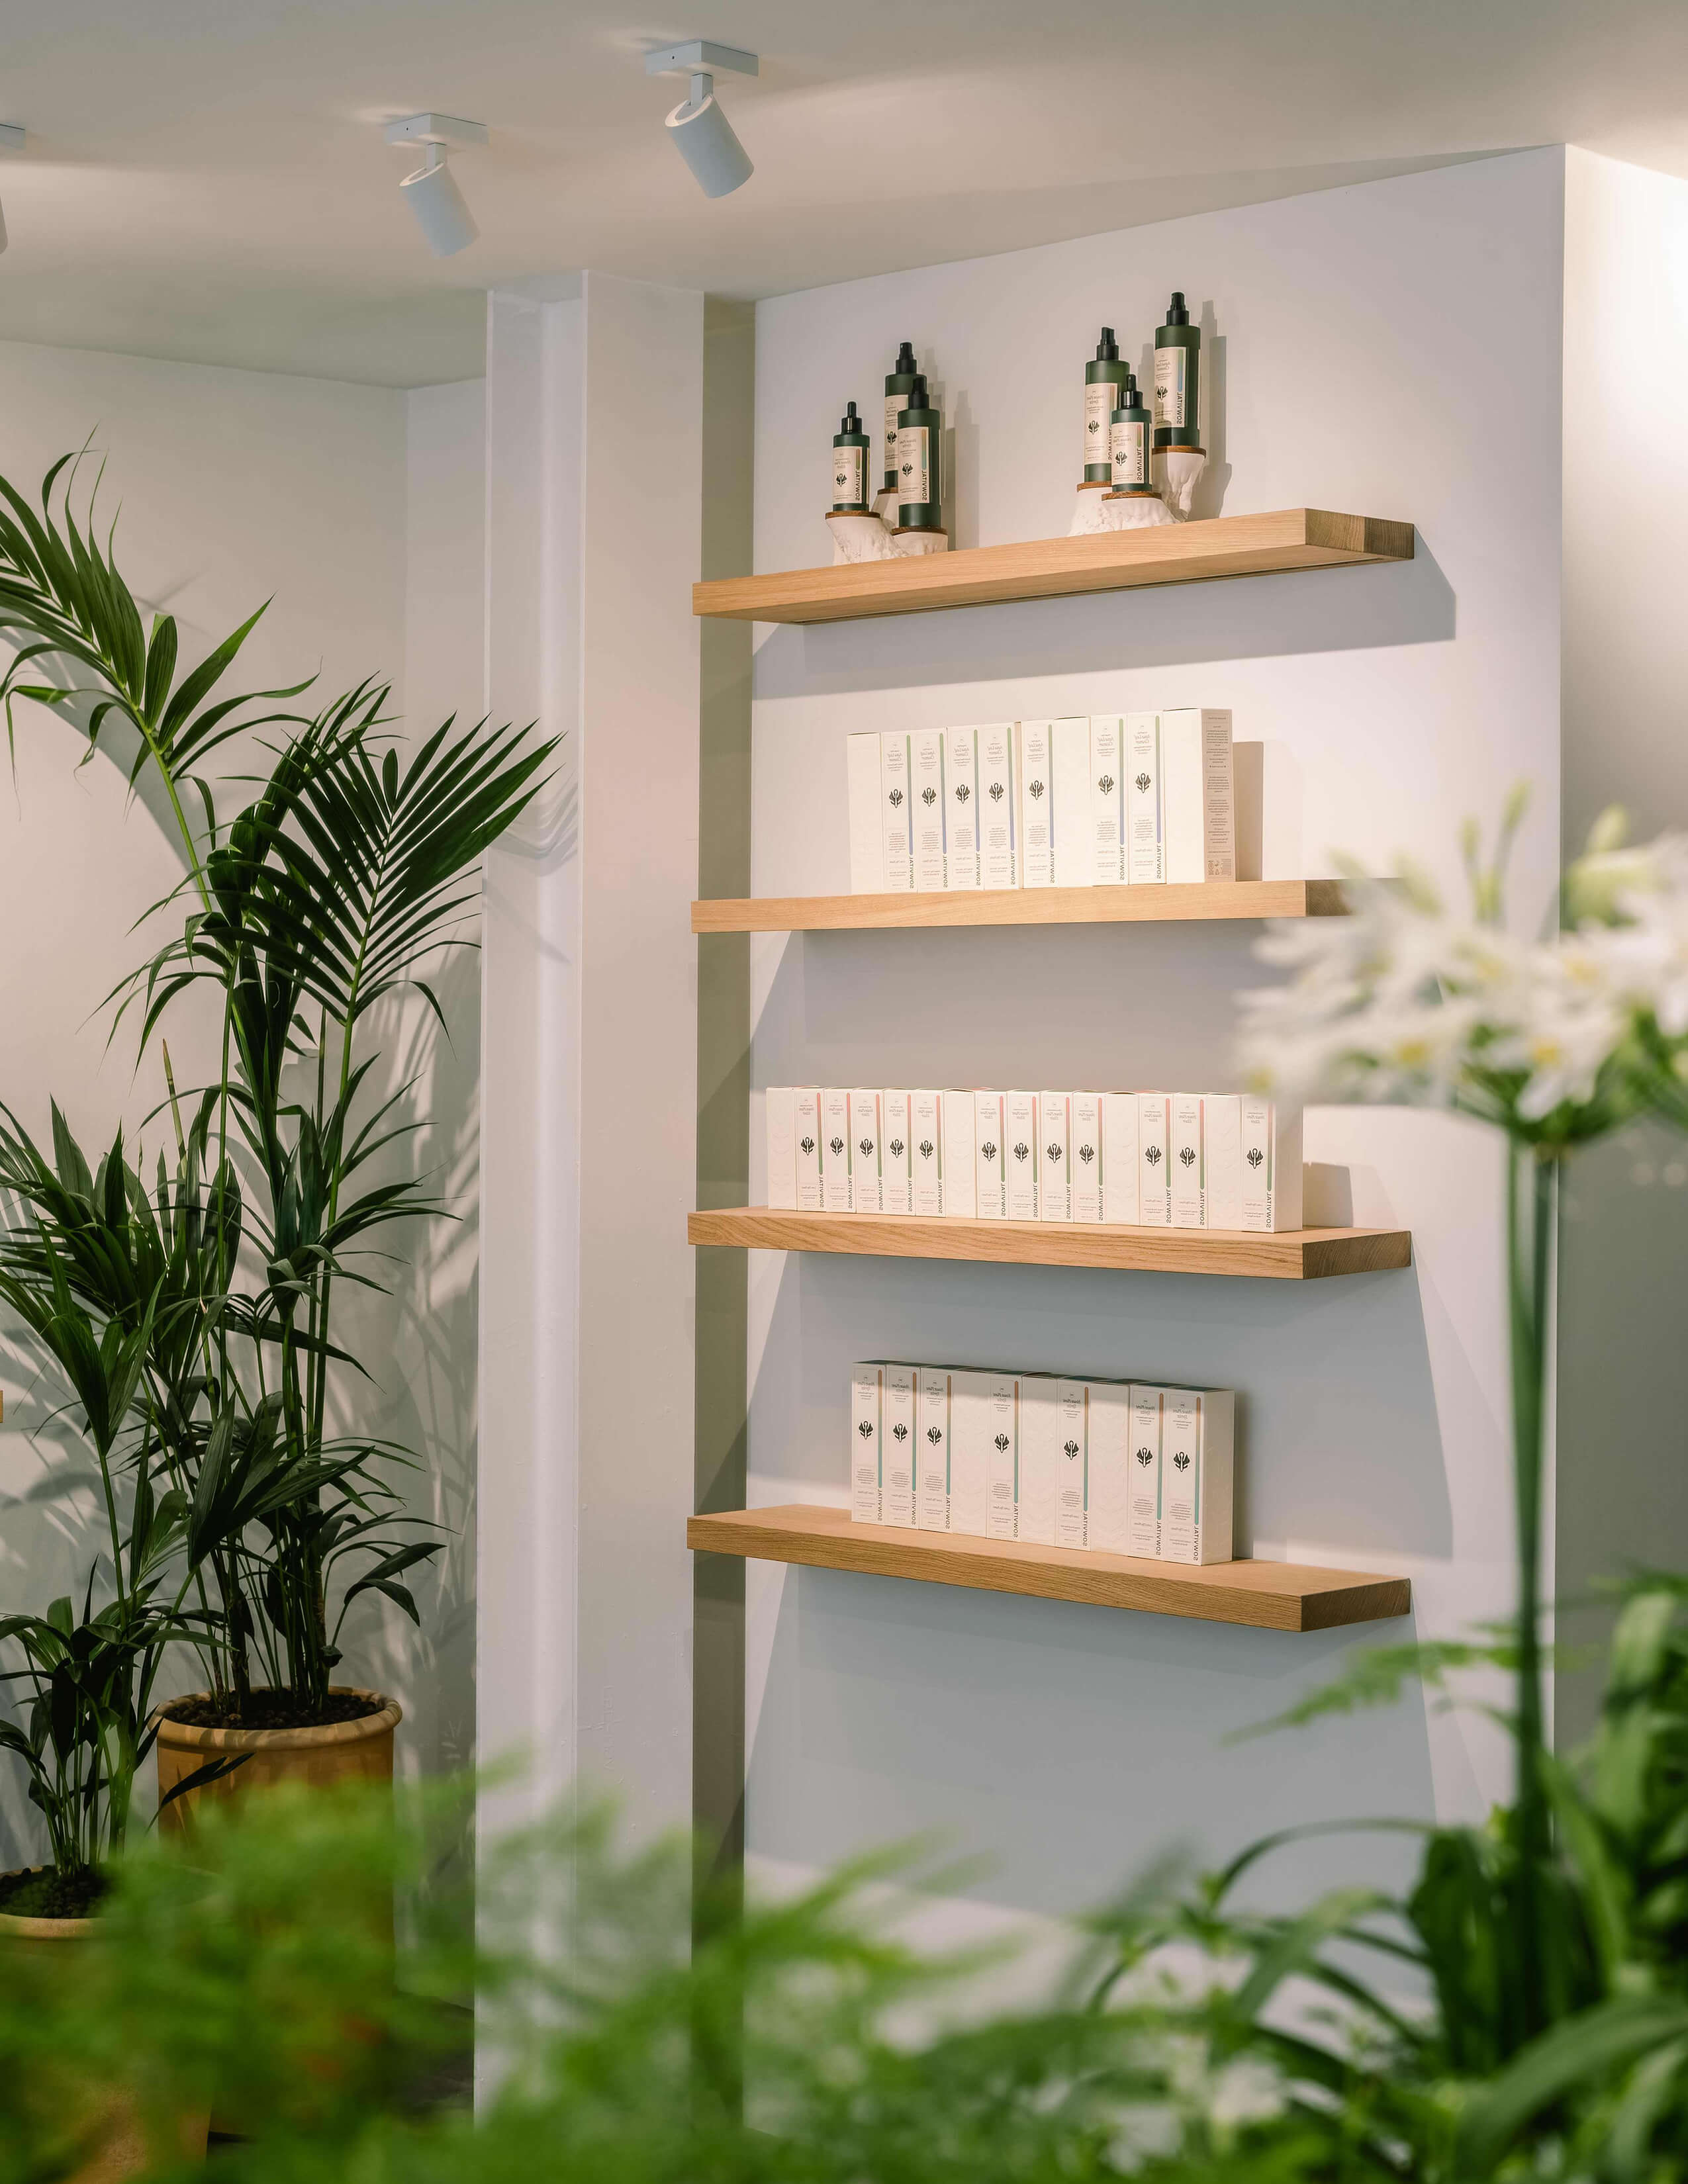 The Sowvital products are presented on the wall shelves while there are some potted plants around.